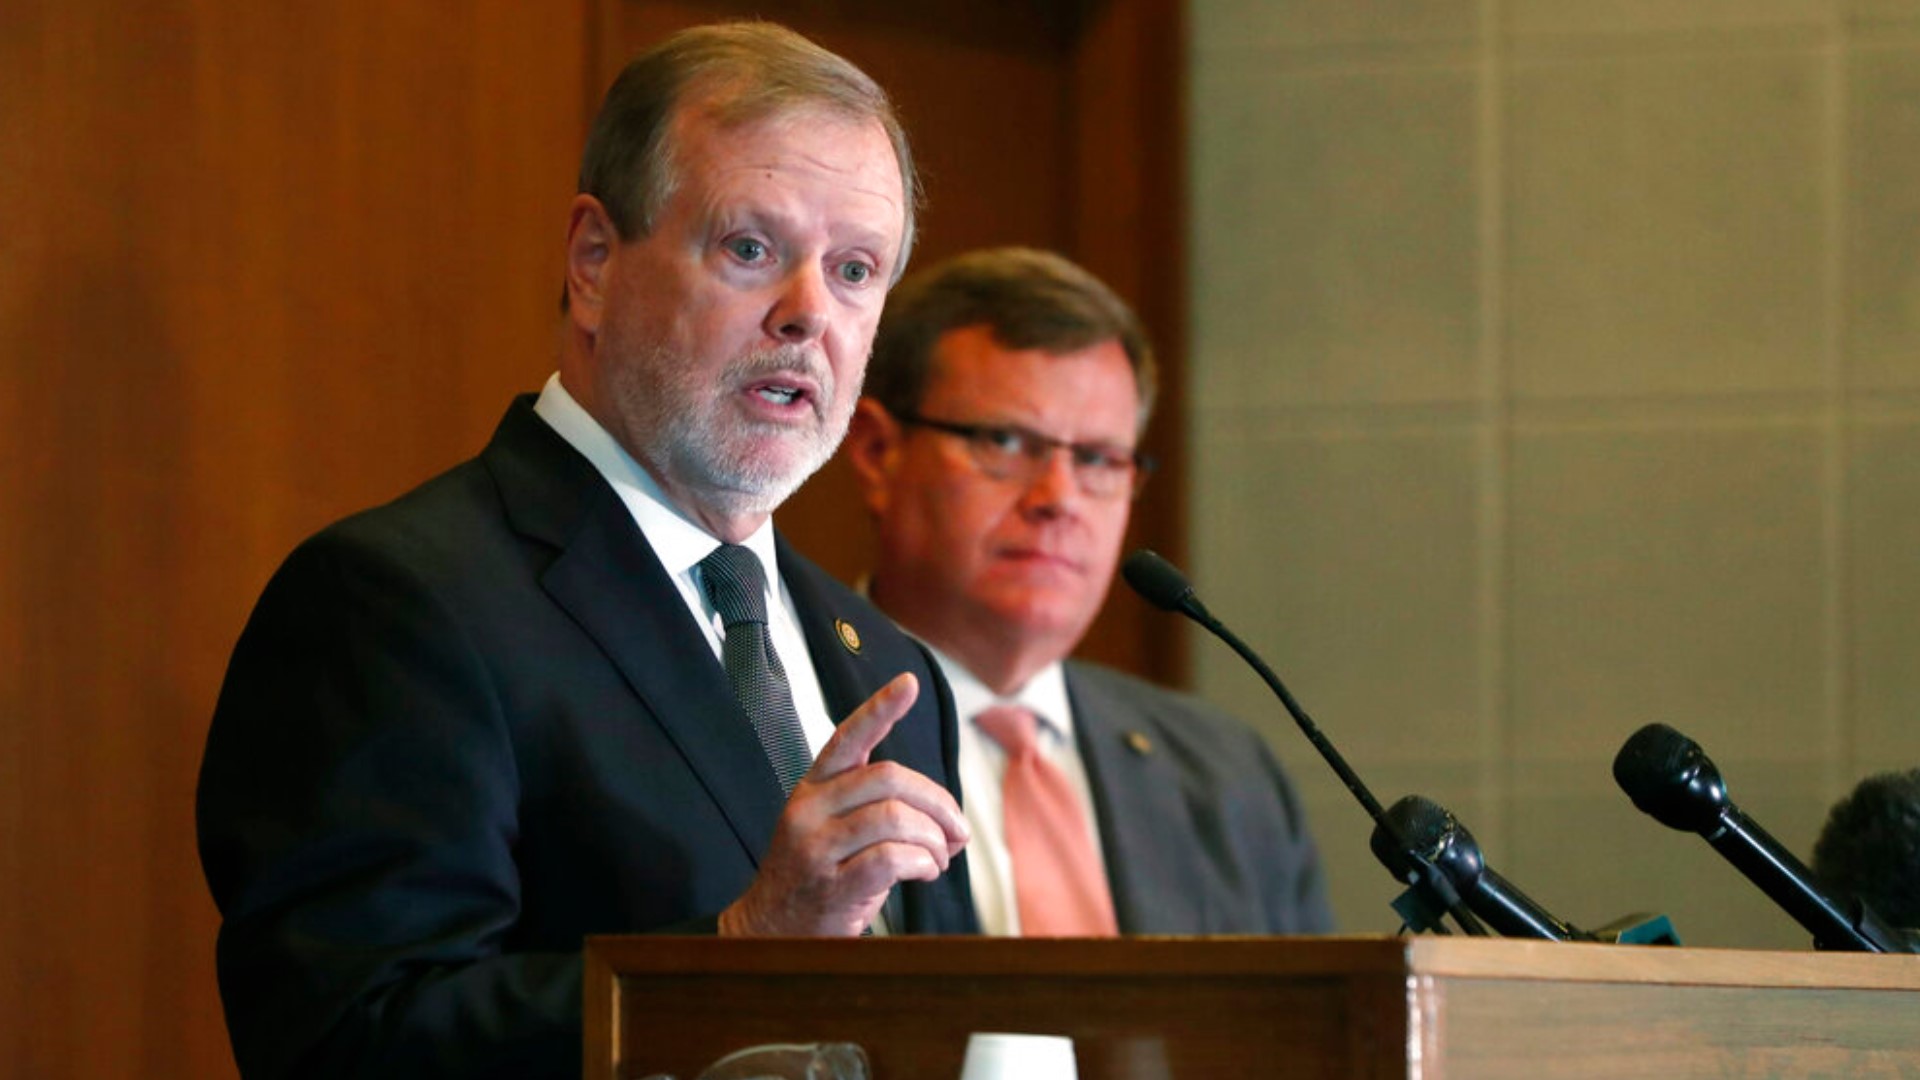 Lawmakers decided not to tie casinos to Medicaid expansion. Senate Leader Phil Berger (R-Rockingham) said a casino bill is unlikely to get a vote soon.